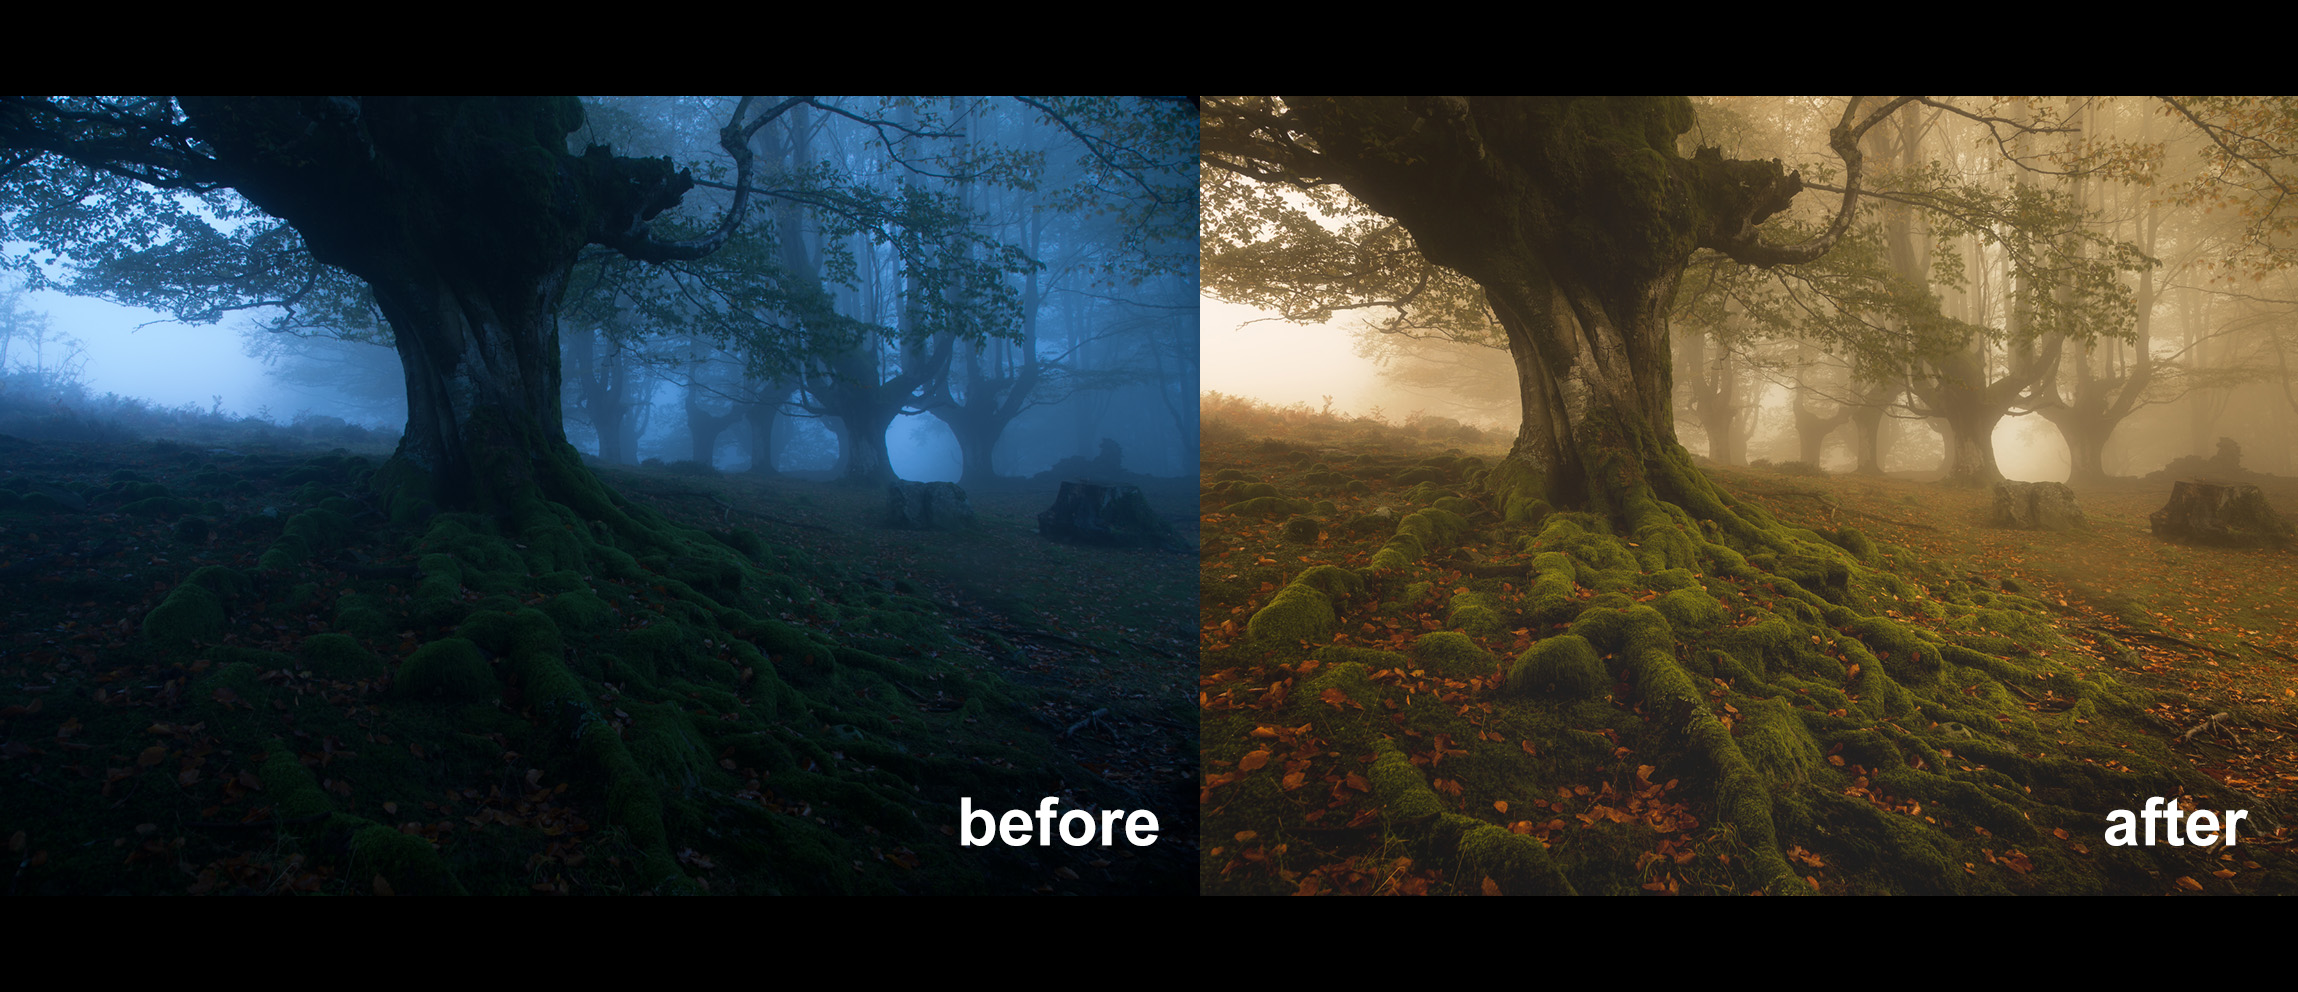 CJ7: How To Edit A Foggy, Moody Landscape In Photoshop